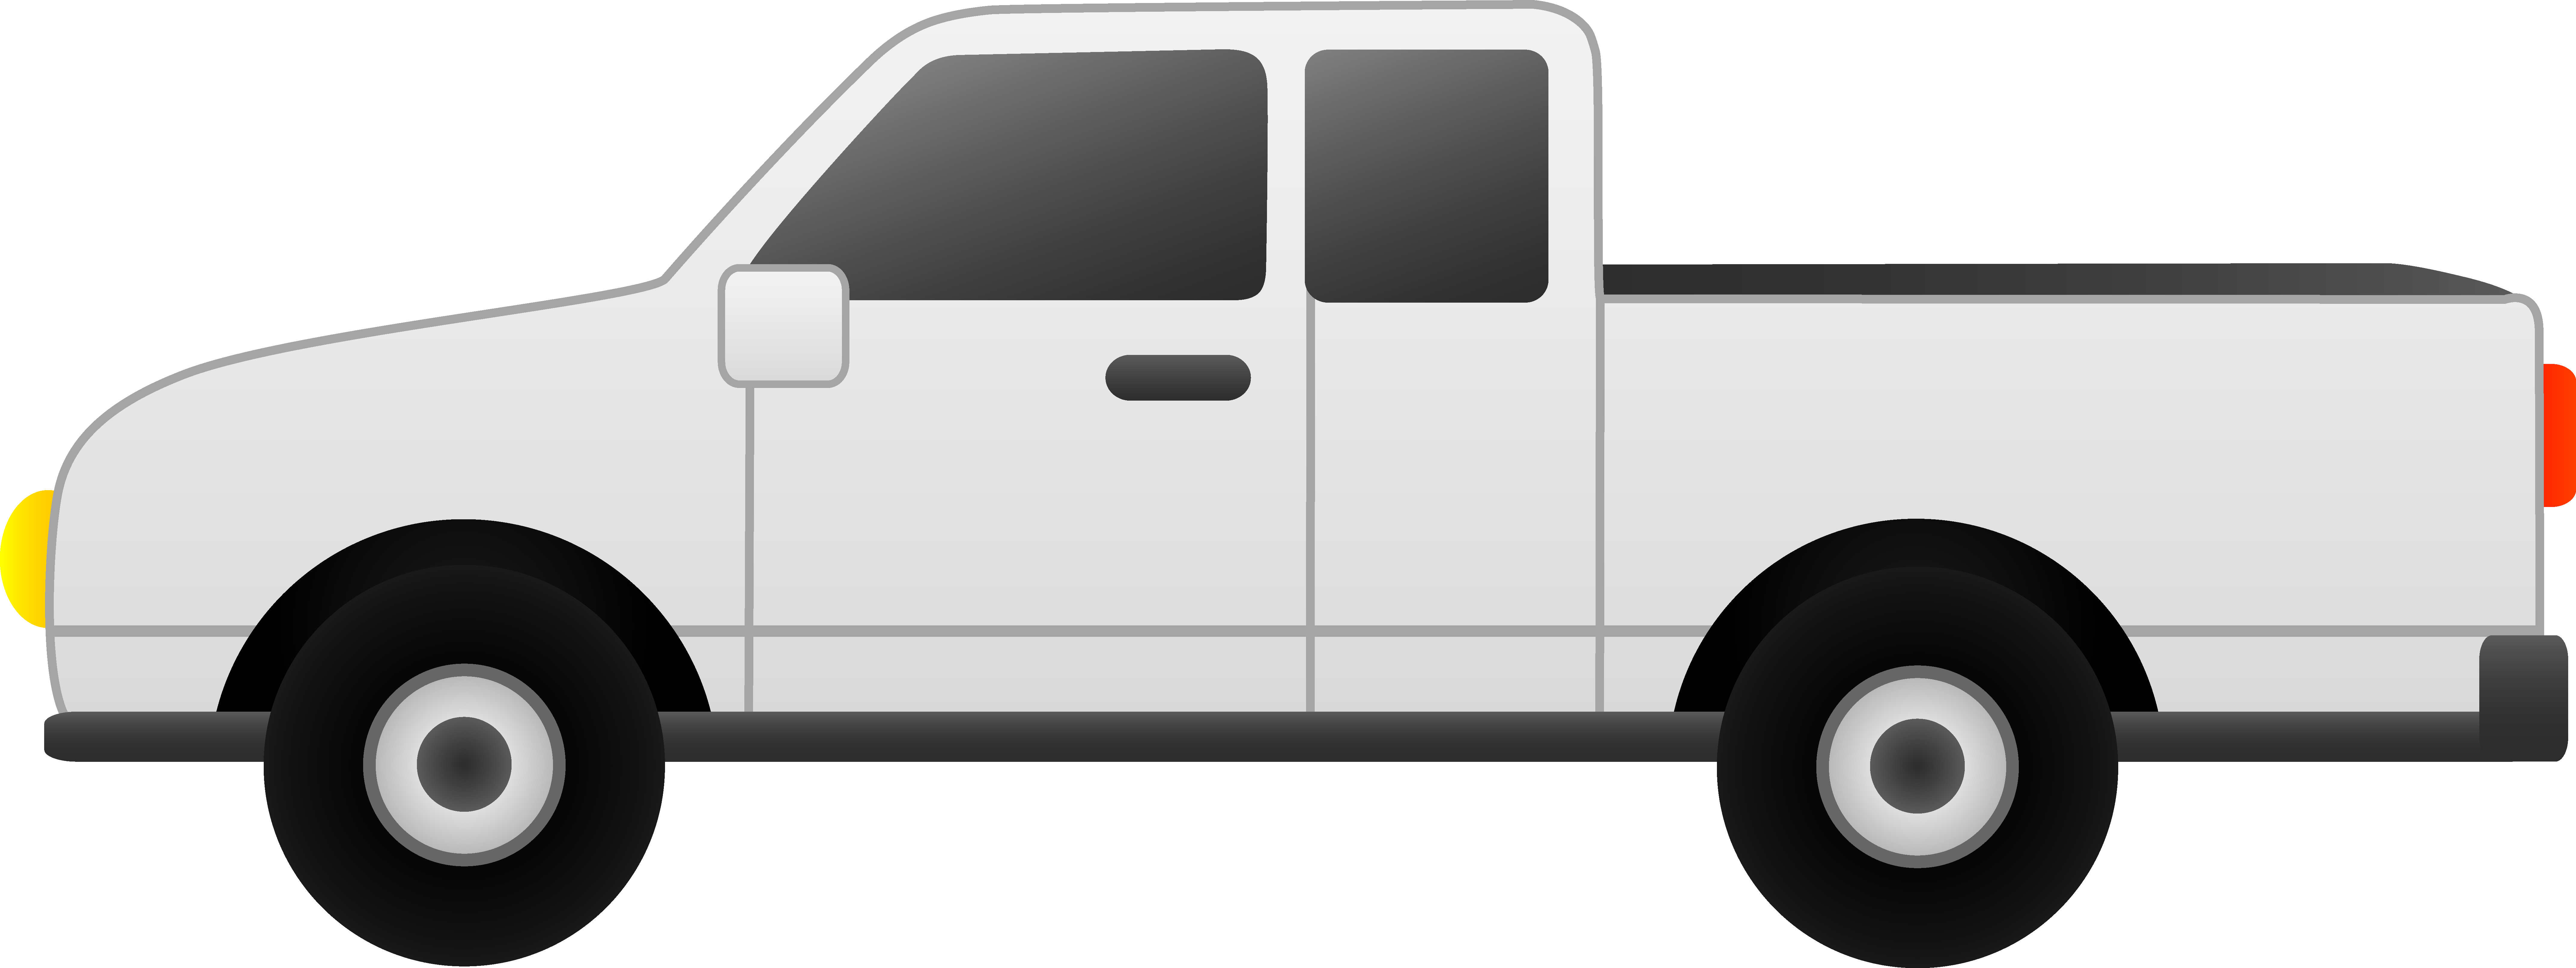 Parent car pickup clipart black and white